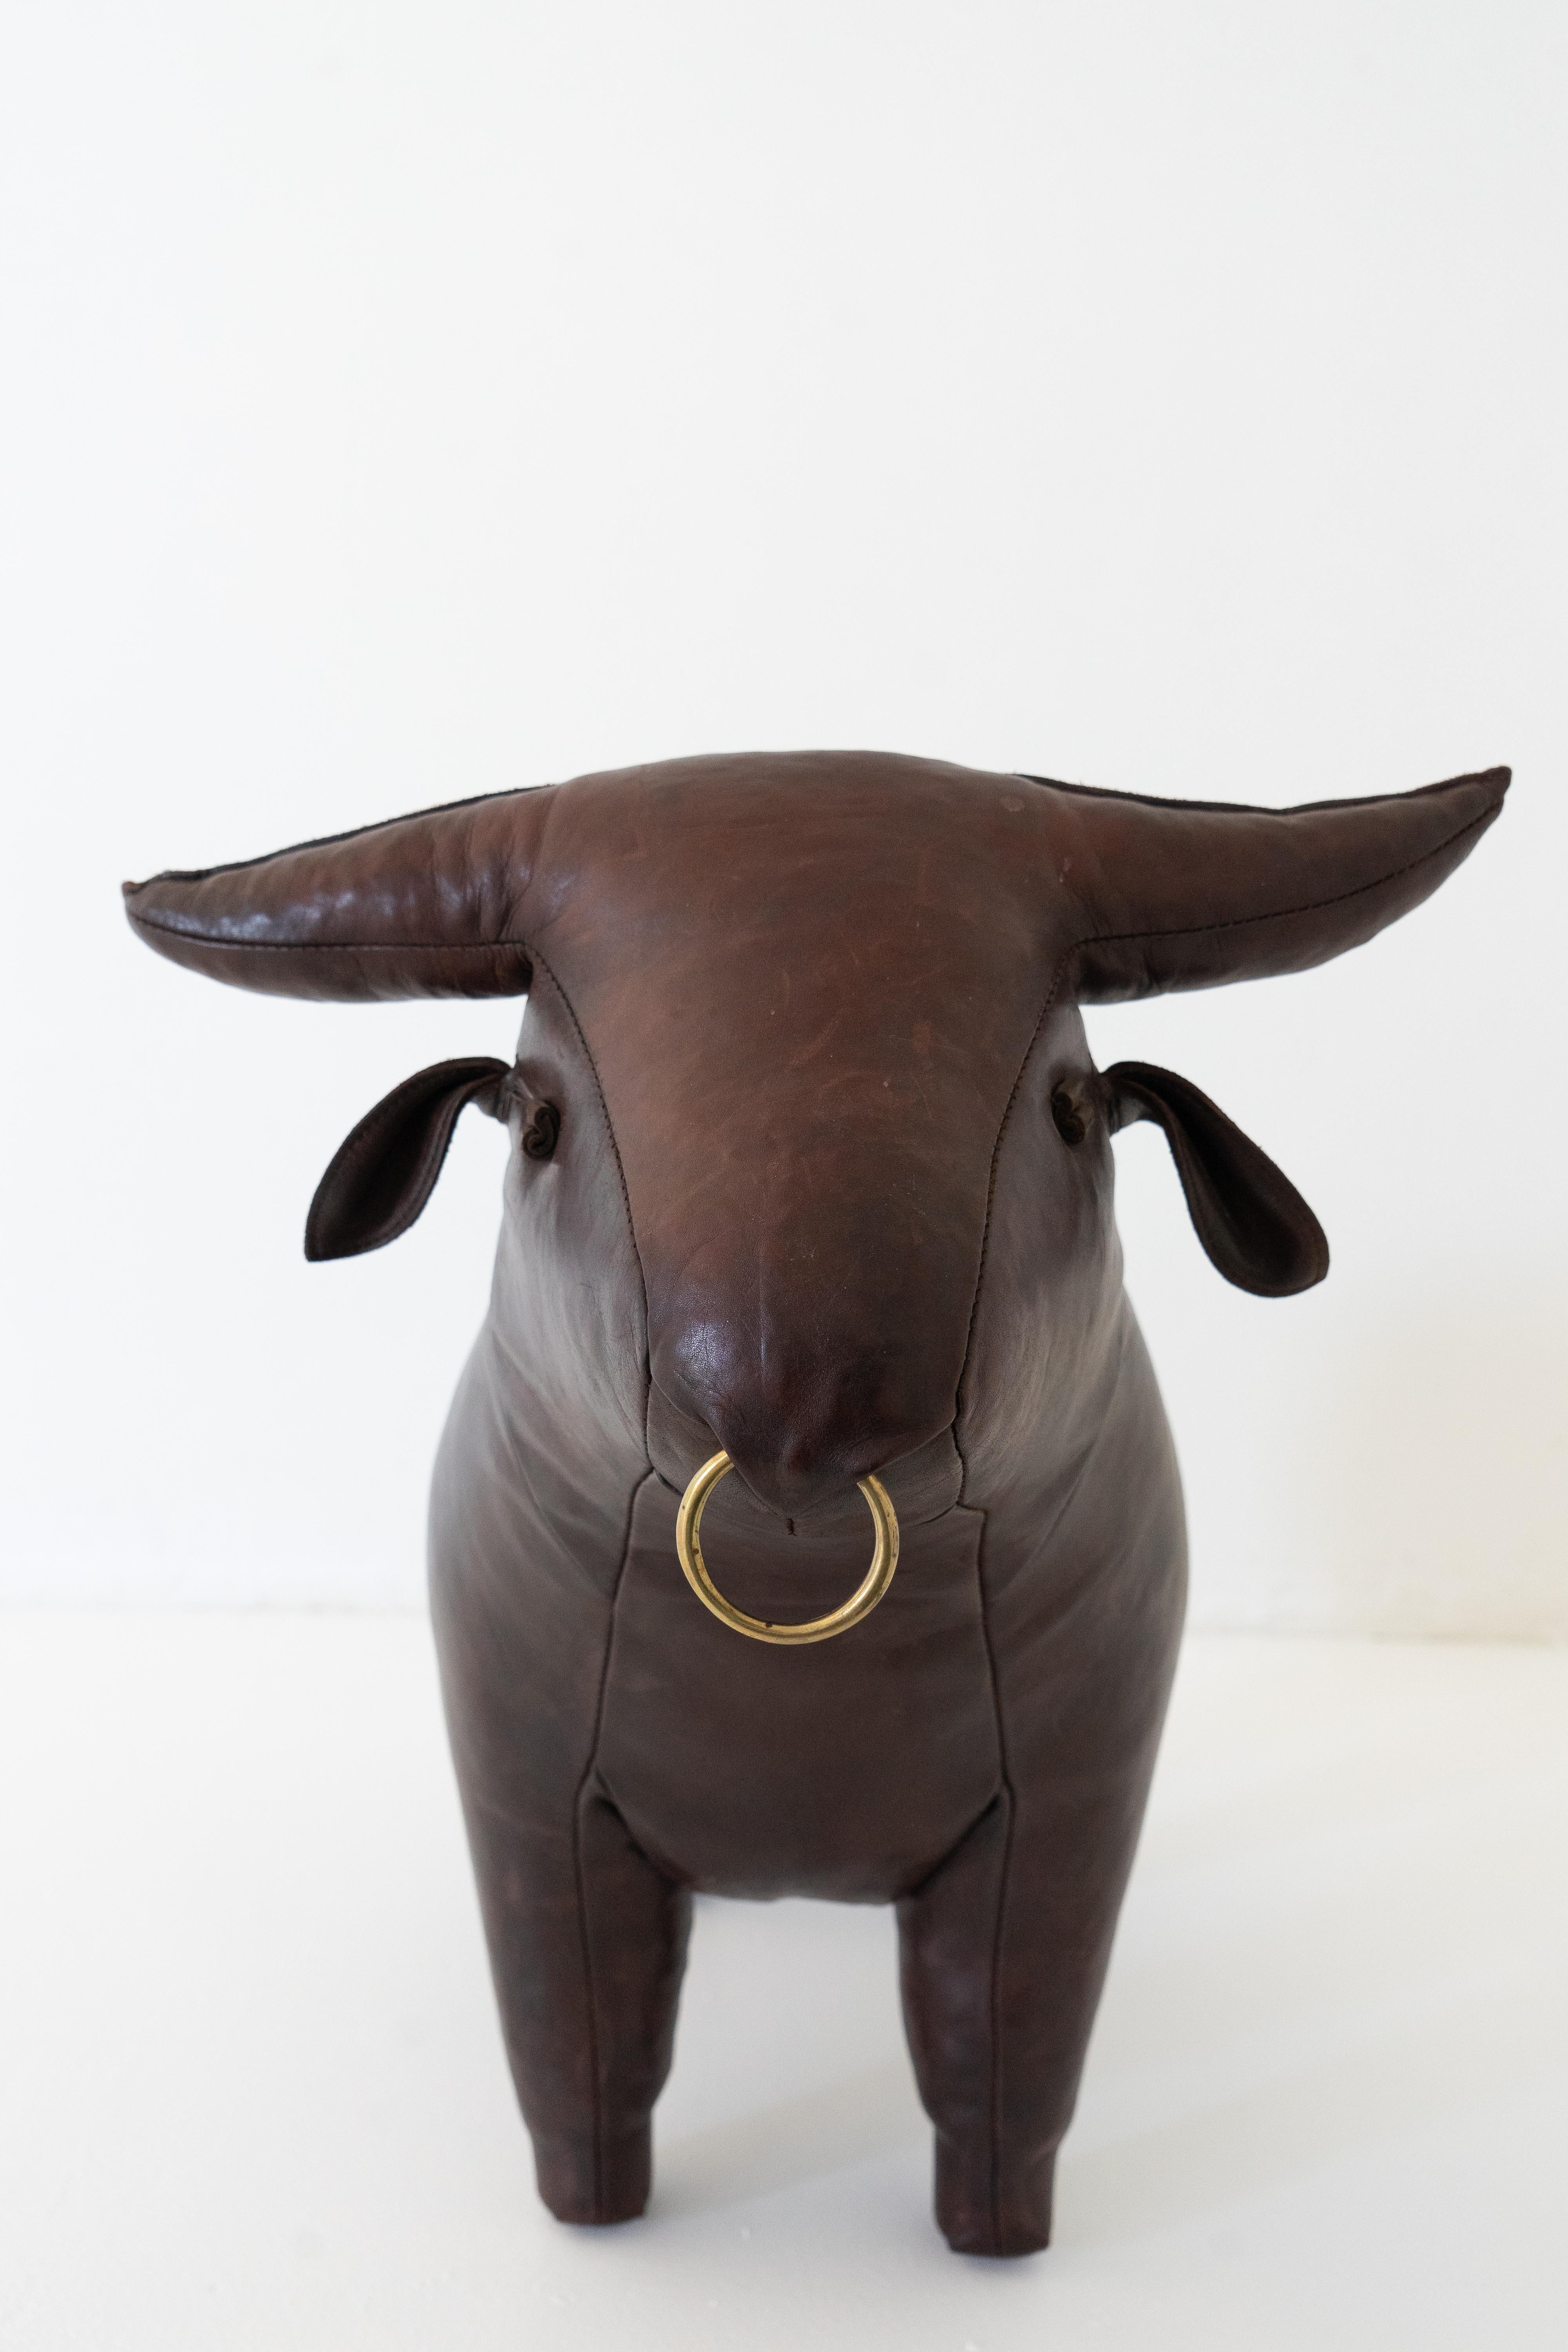 Iconic Dimitri Omersa Bull footstool for Abercombie and Fitch 

Later production conserved in excellent vintage condition. 

These iconic pieces are a conversation piece, statement piece and amplifies any room. 

Functional art that is